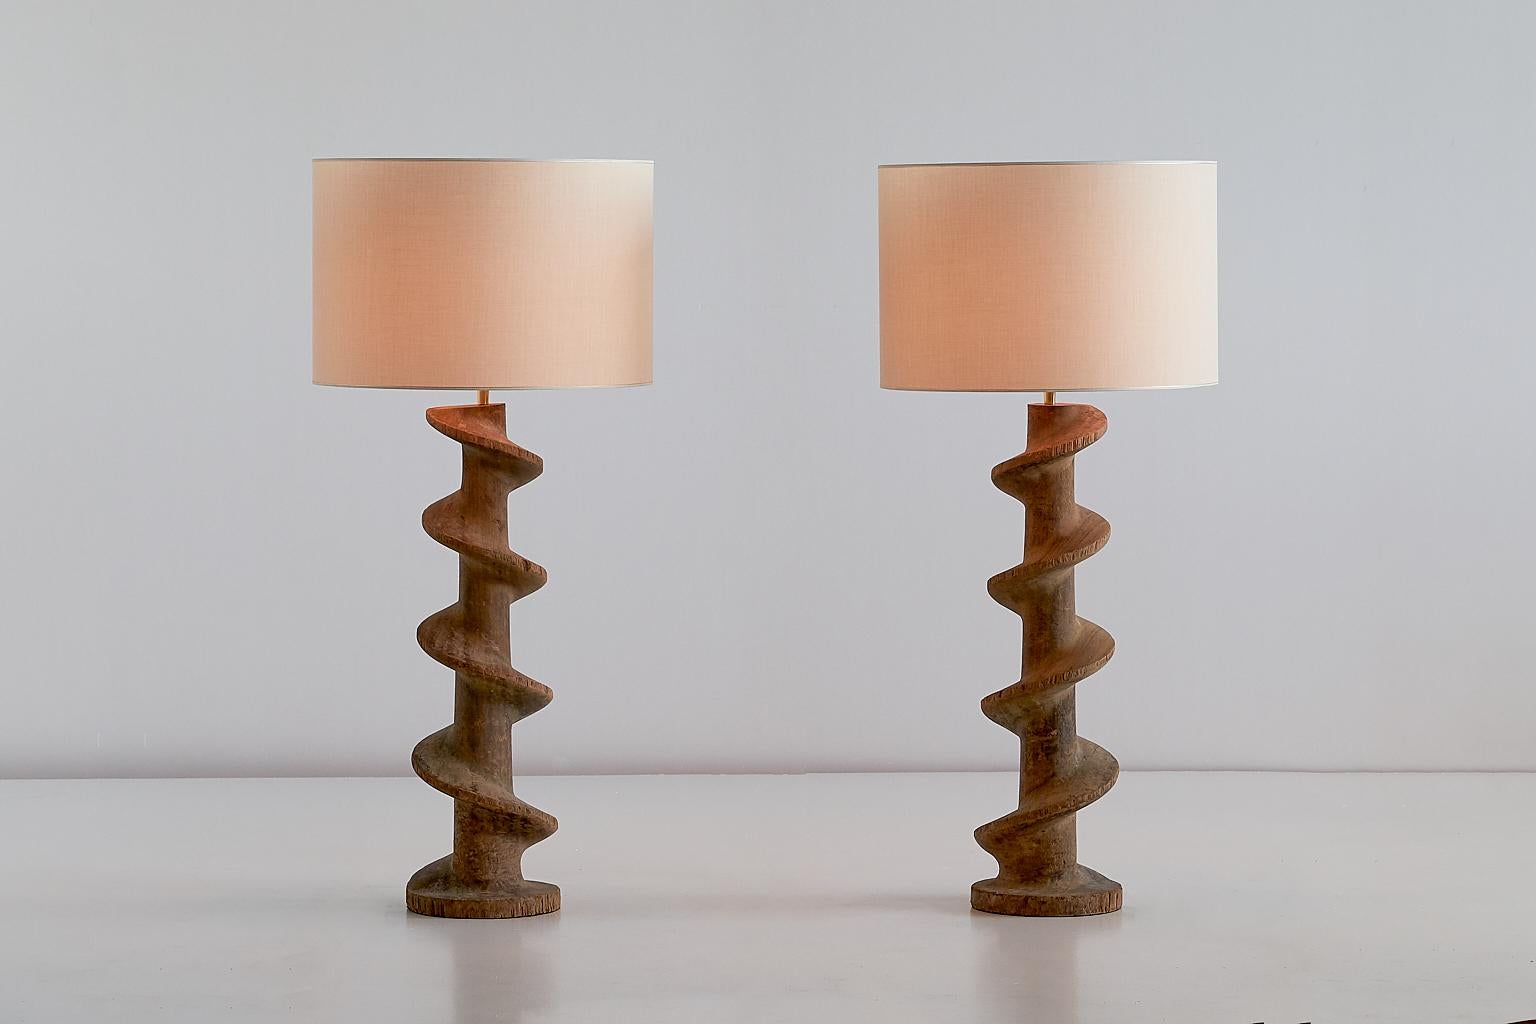 Rustic Pair of Table Lamps with Wooden Spiral Screw Base, Belgium, Late 19th Century